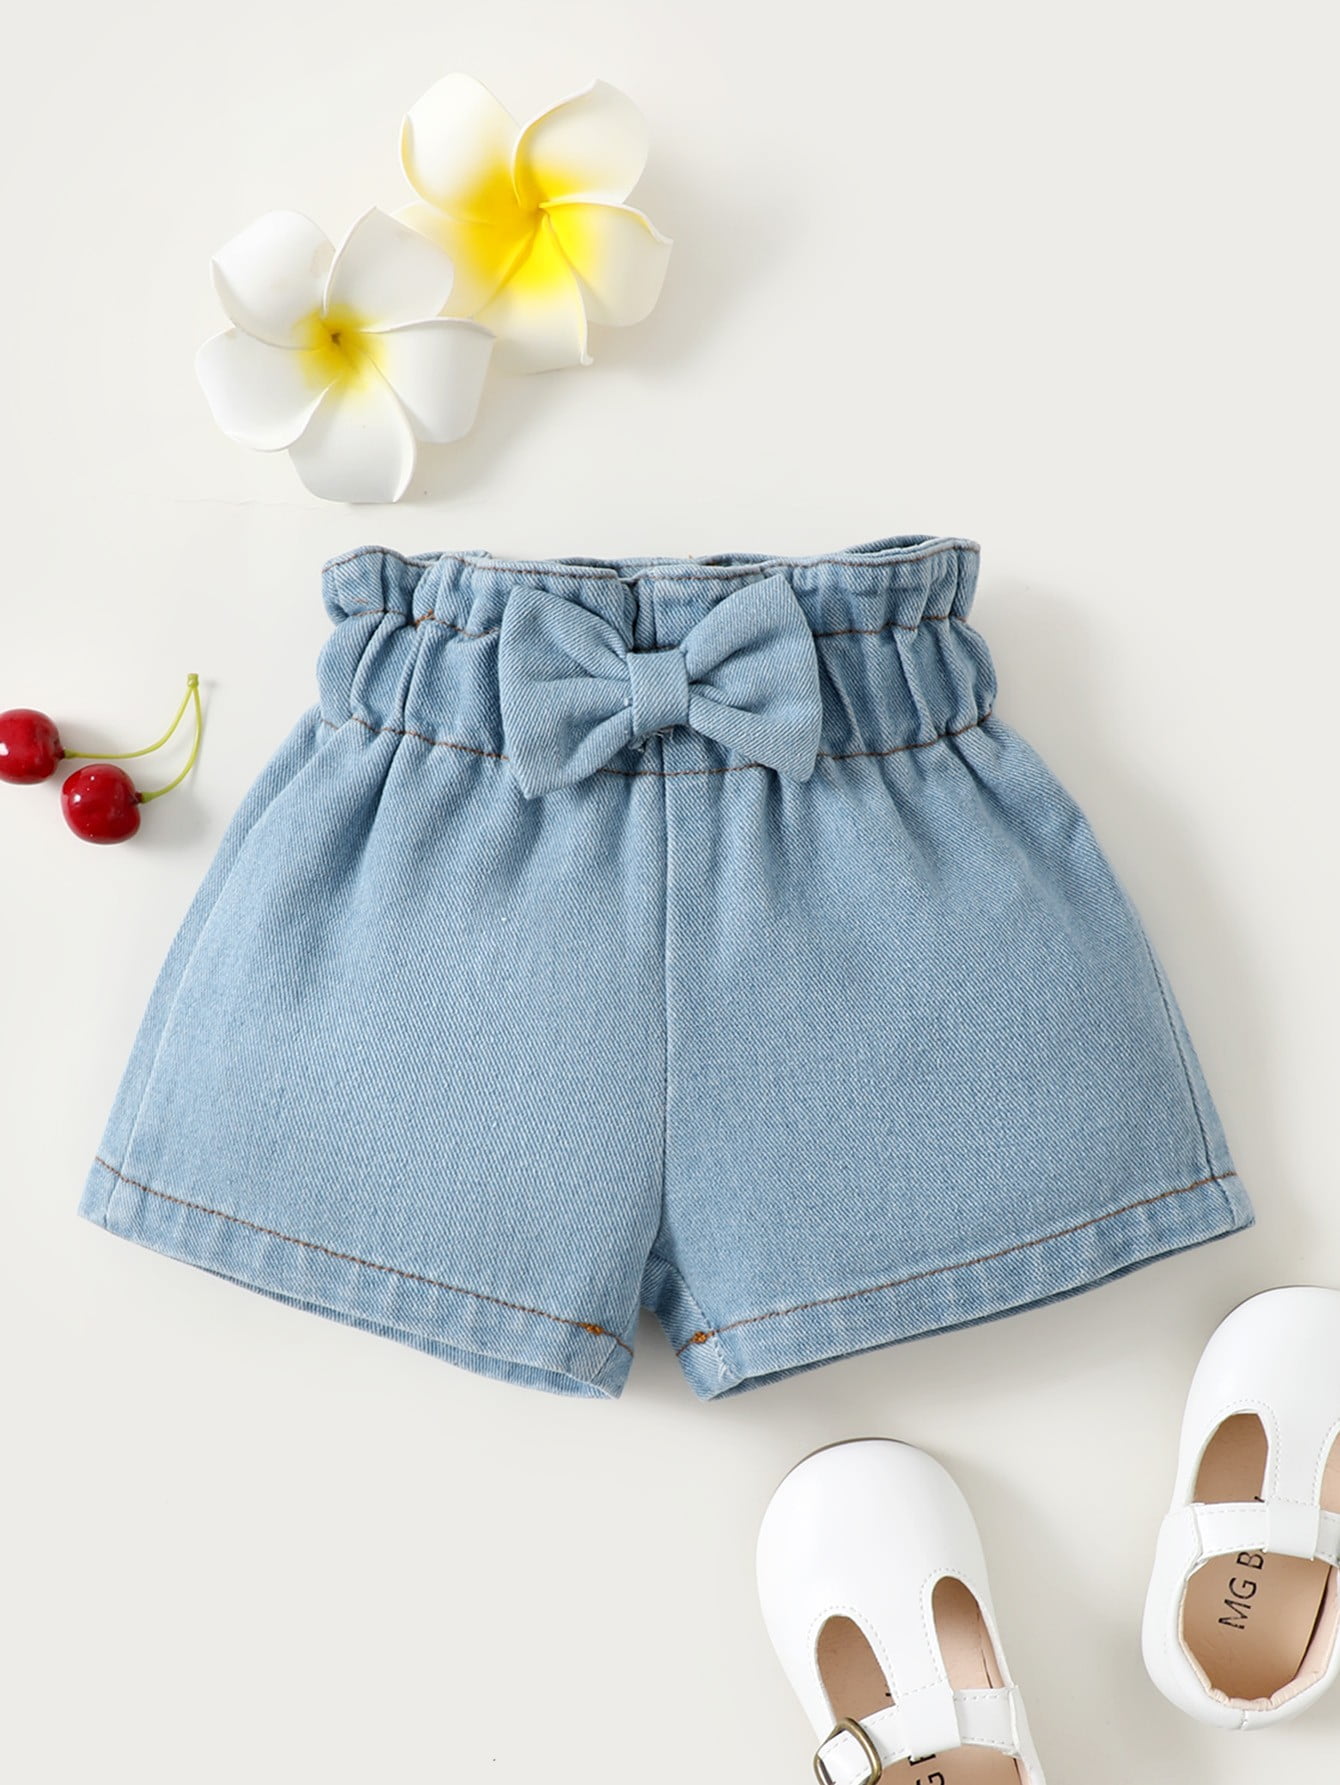 ZCFZJW Toddler Baby Girls Casual Denim Shorts Middle School Students Summer  High Waisted Thin Elastic Waistband Jeans Short Pants #02-Blue 14-15 Years